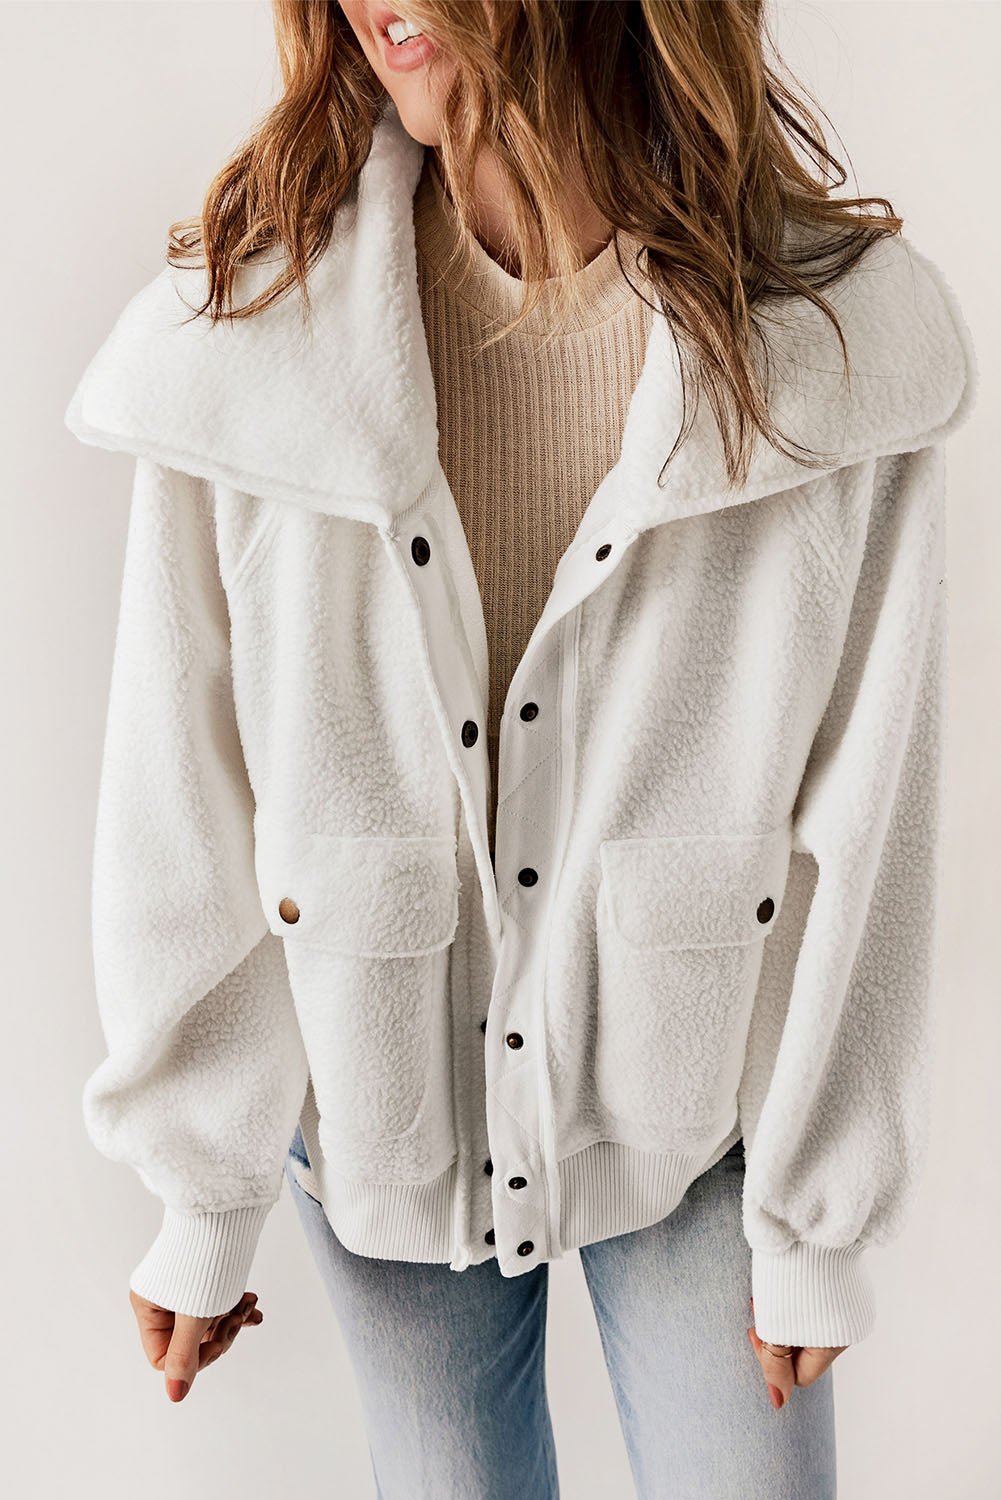 Snap Down Collared Jacket - Fashion Girl Online Store